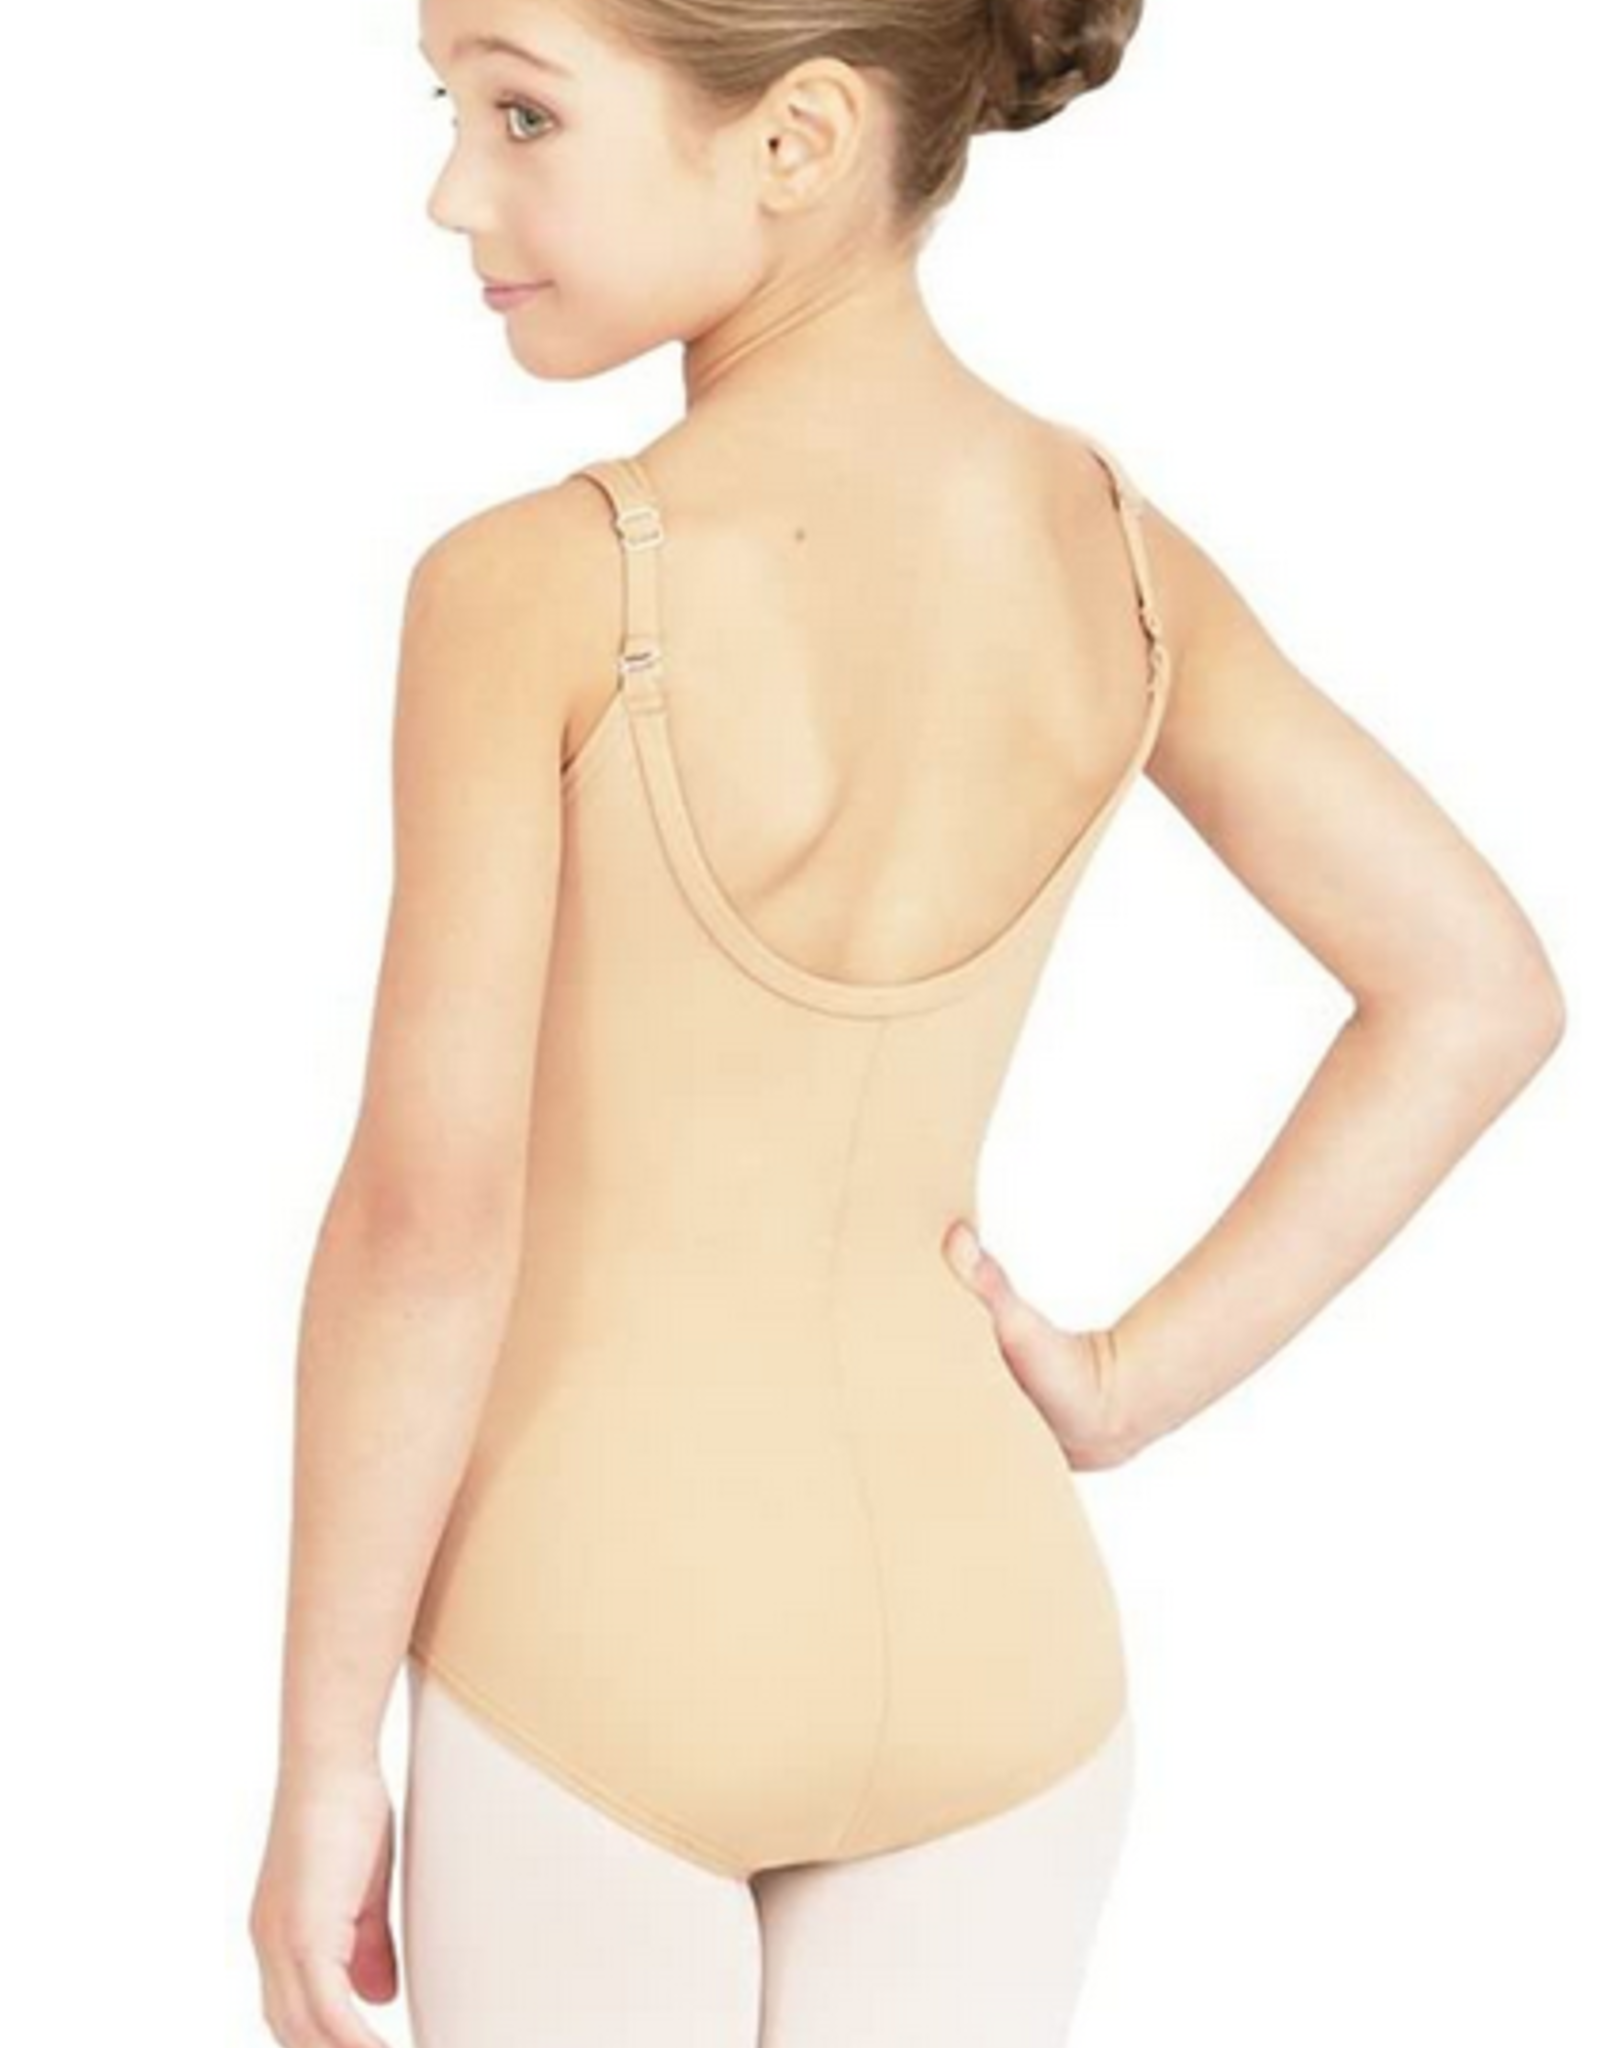 MOTIONWEAR CLASSIC CAMISOLE LEOTARD WITH ADJUSTABLE STRAPS  (2565C)